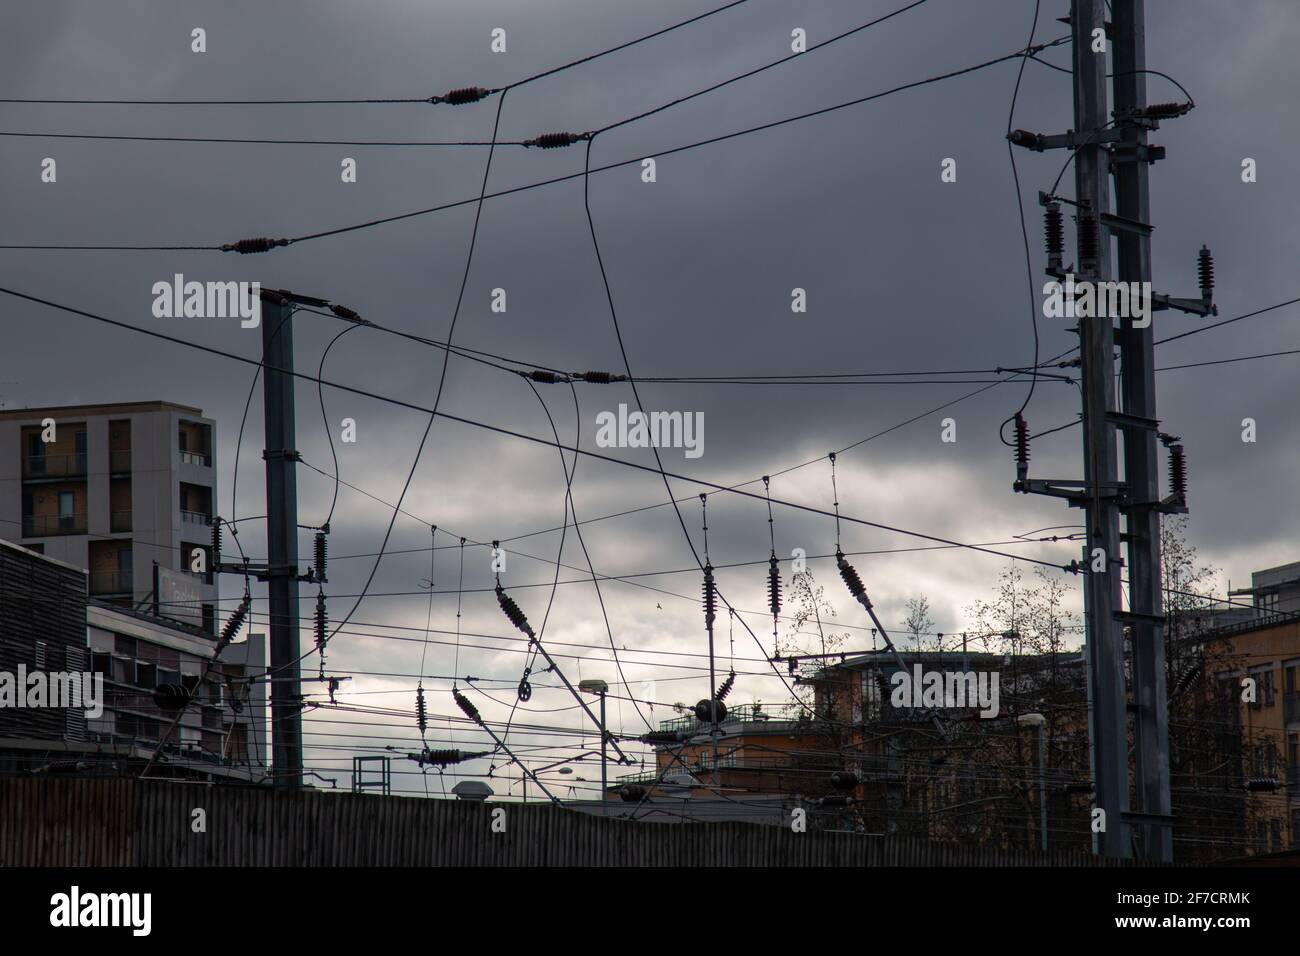 Overhead power lines, including OLE masts, catenary and contact wires, for trains silhouetted against a grey cloudy sky. Stock Photo